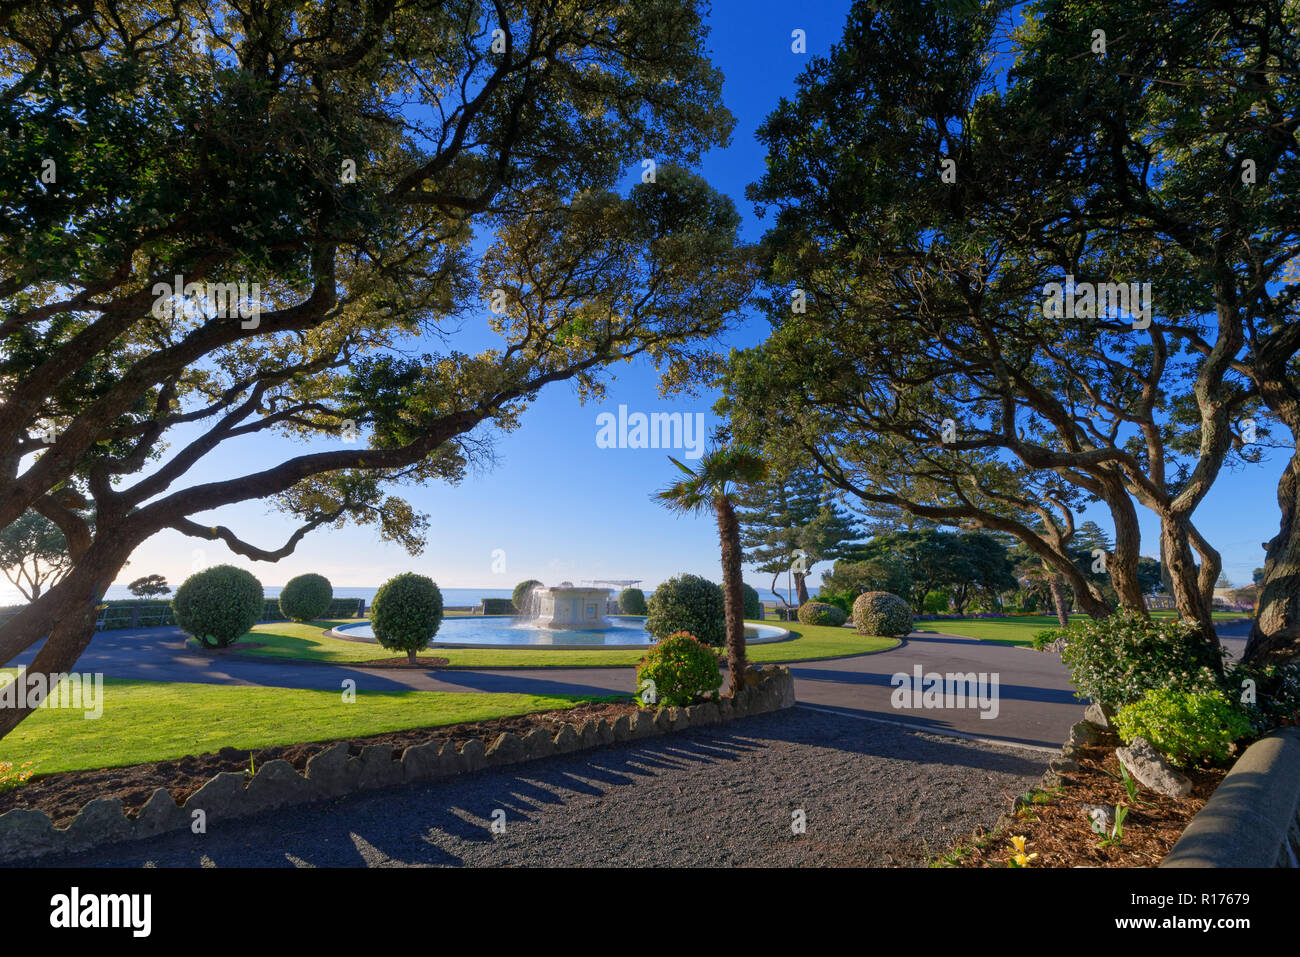 Beachfront park in the town of Napier, New Zealand Stock Photo